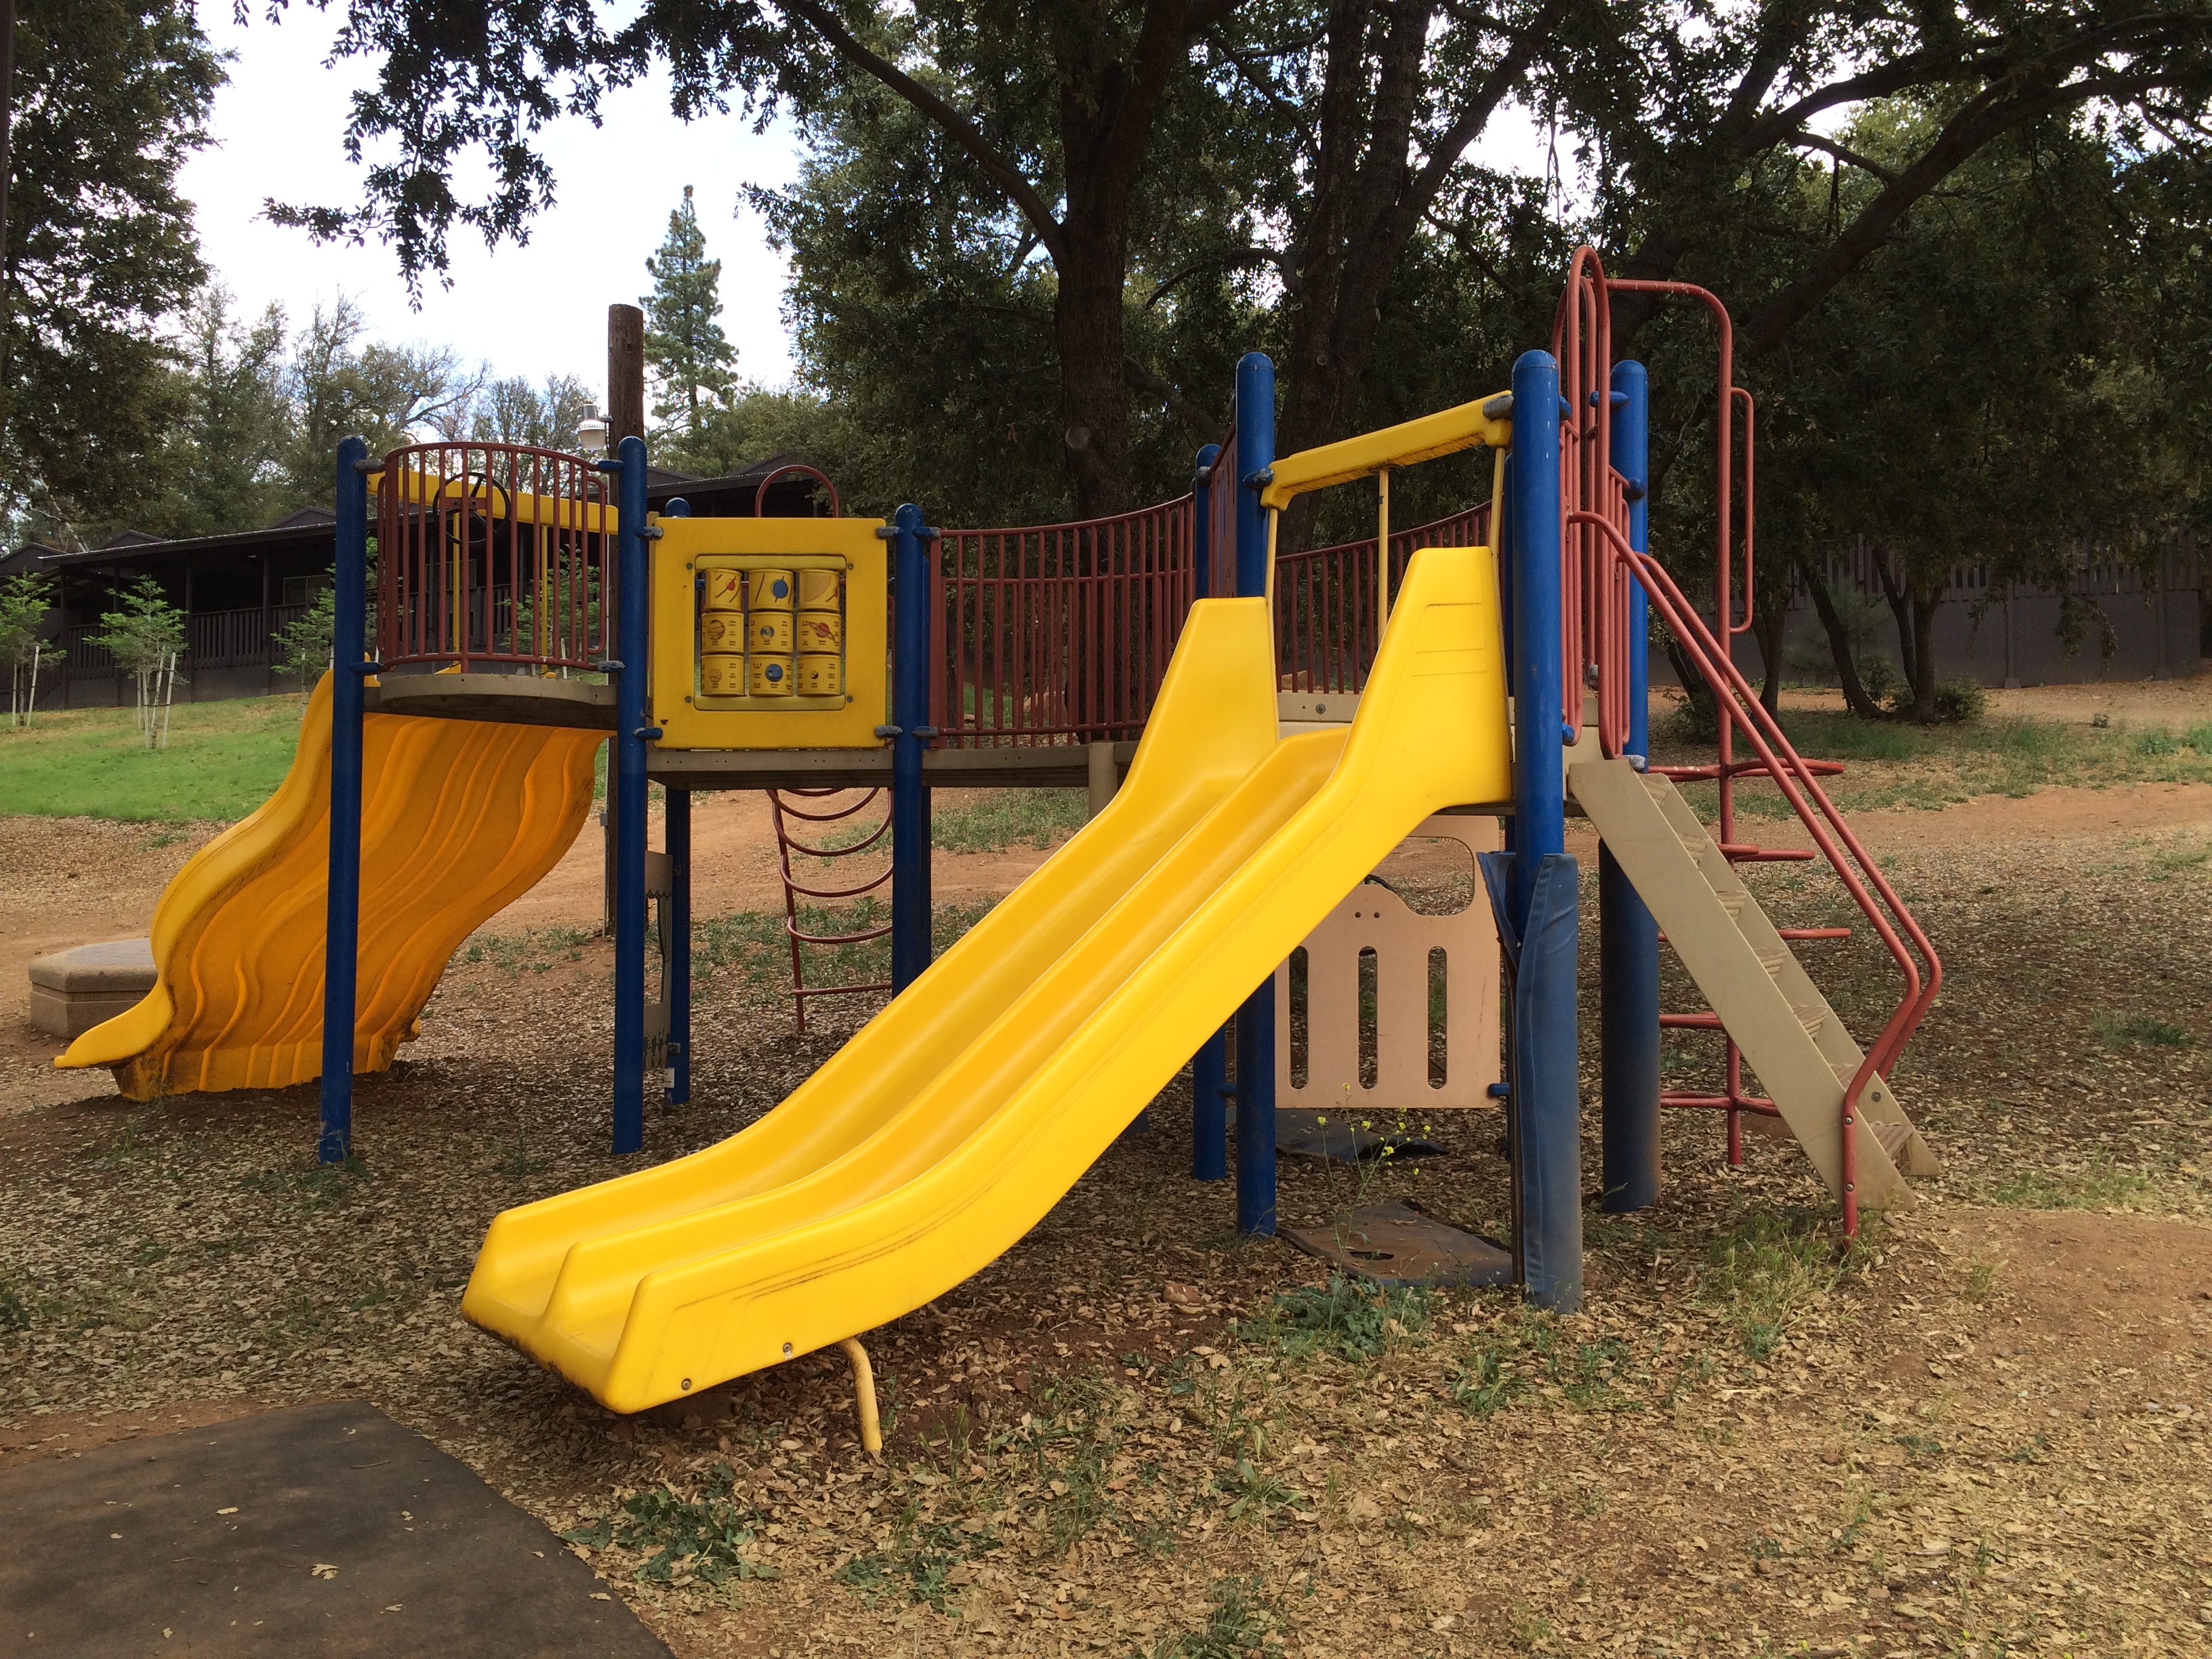 Playground set with two yellow plastic slides